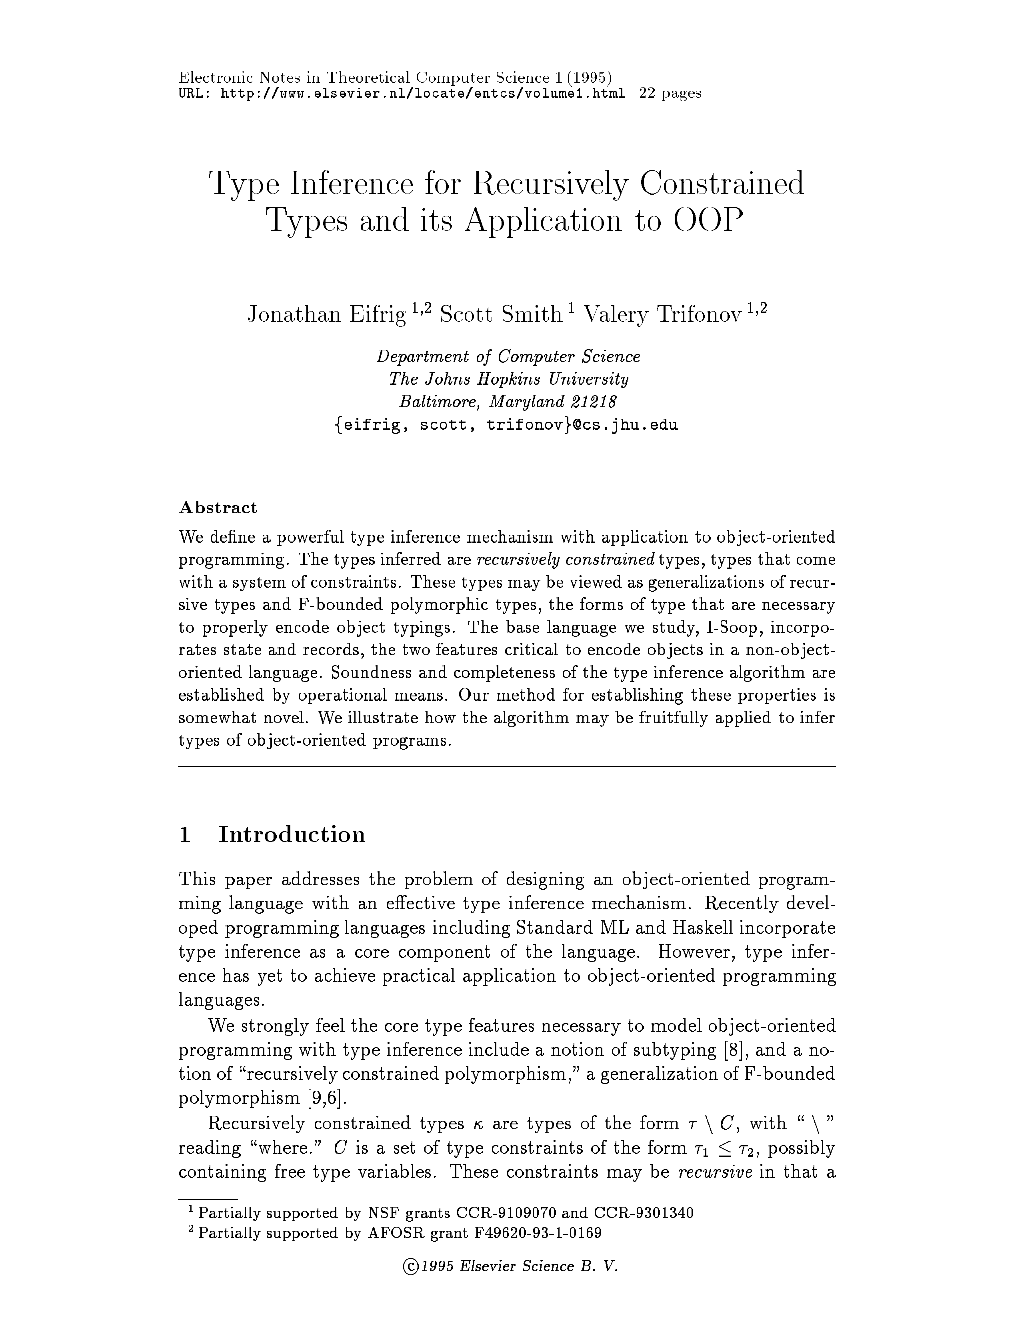 Type Inference for Recursively Constrained Types and Its